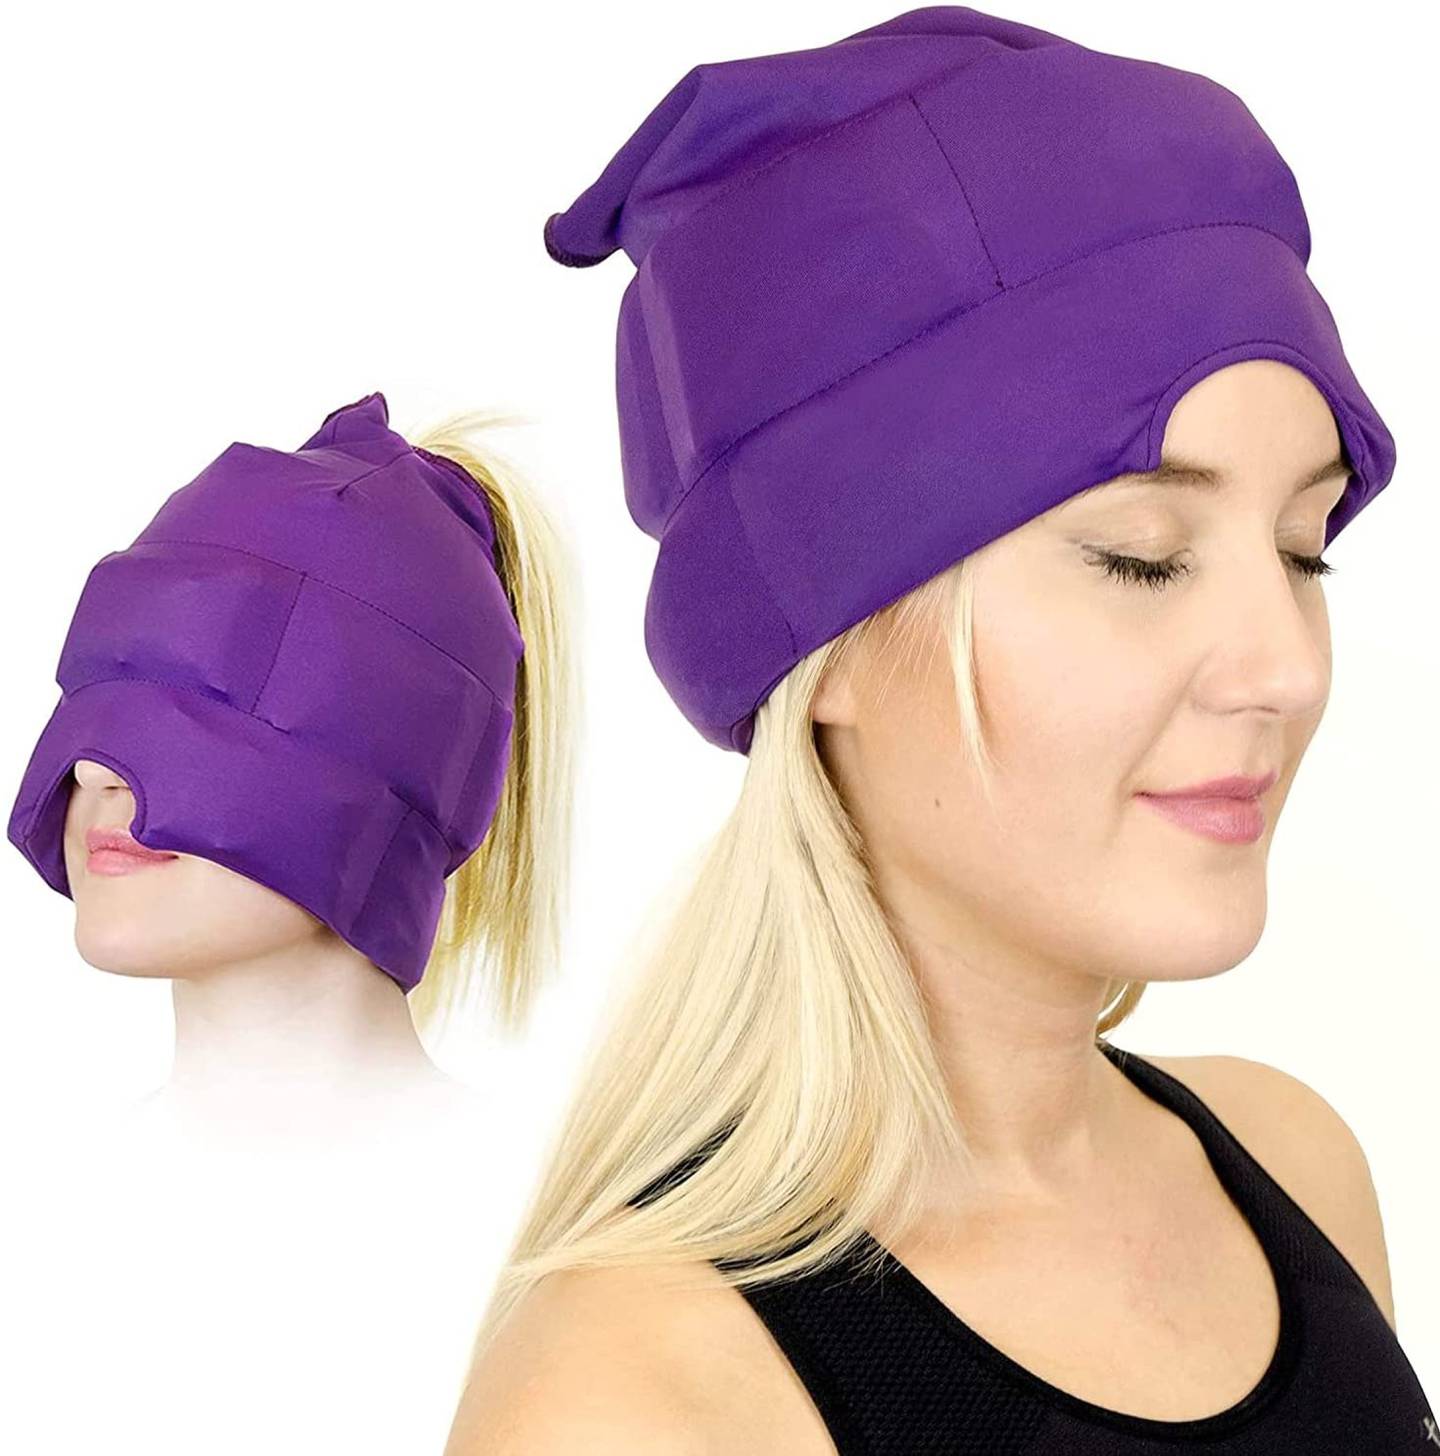 The headache-alleviating aubergine cap can be used to alleviate heatwaves too. Photo :Amazon